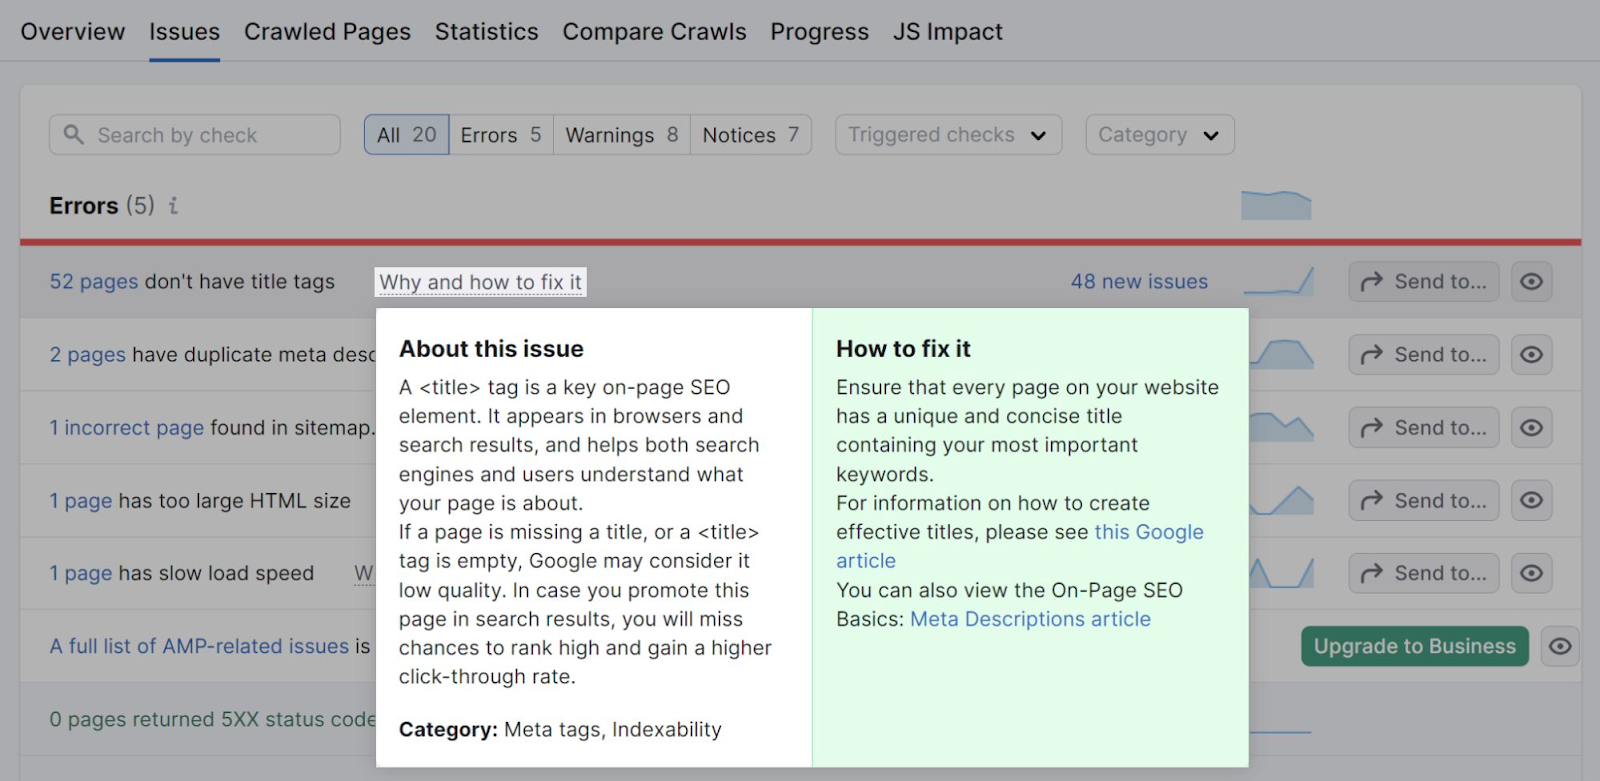 How to fix a title tag issue explained in Site Audit tool